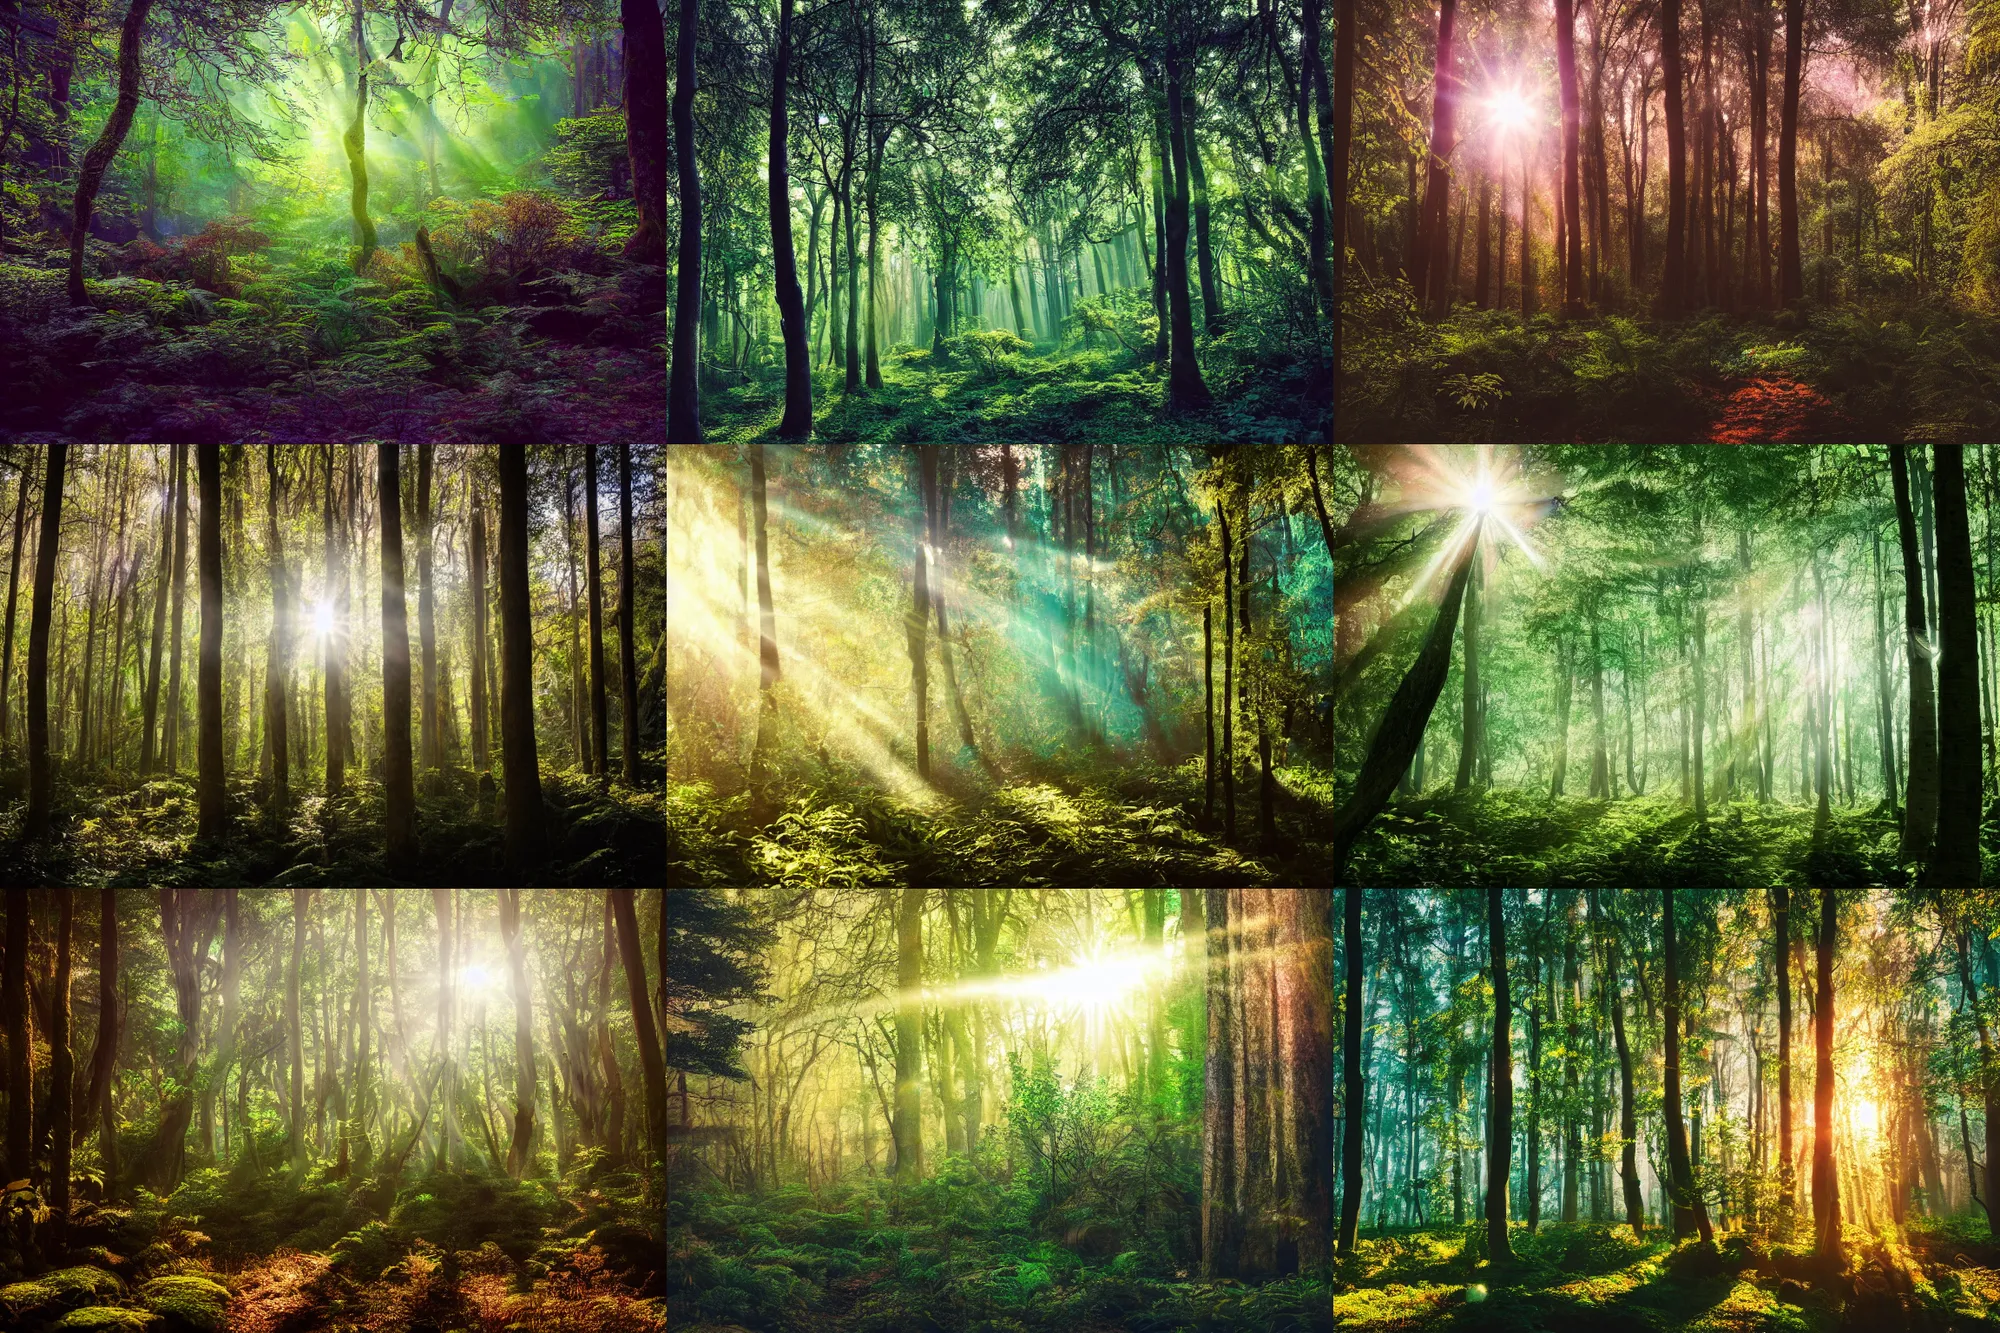 Prompt: photo of a beautiful magical fantasy forest, with sunlight filtering through the trees, dense, verdant, surrounded by beautiful iridescent bushes, stunning opalescent trees, 35mm photo, award-winning magazine cover photo, nature photography, cinematic, dramatic, establishing shot